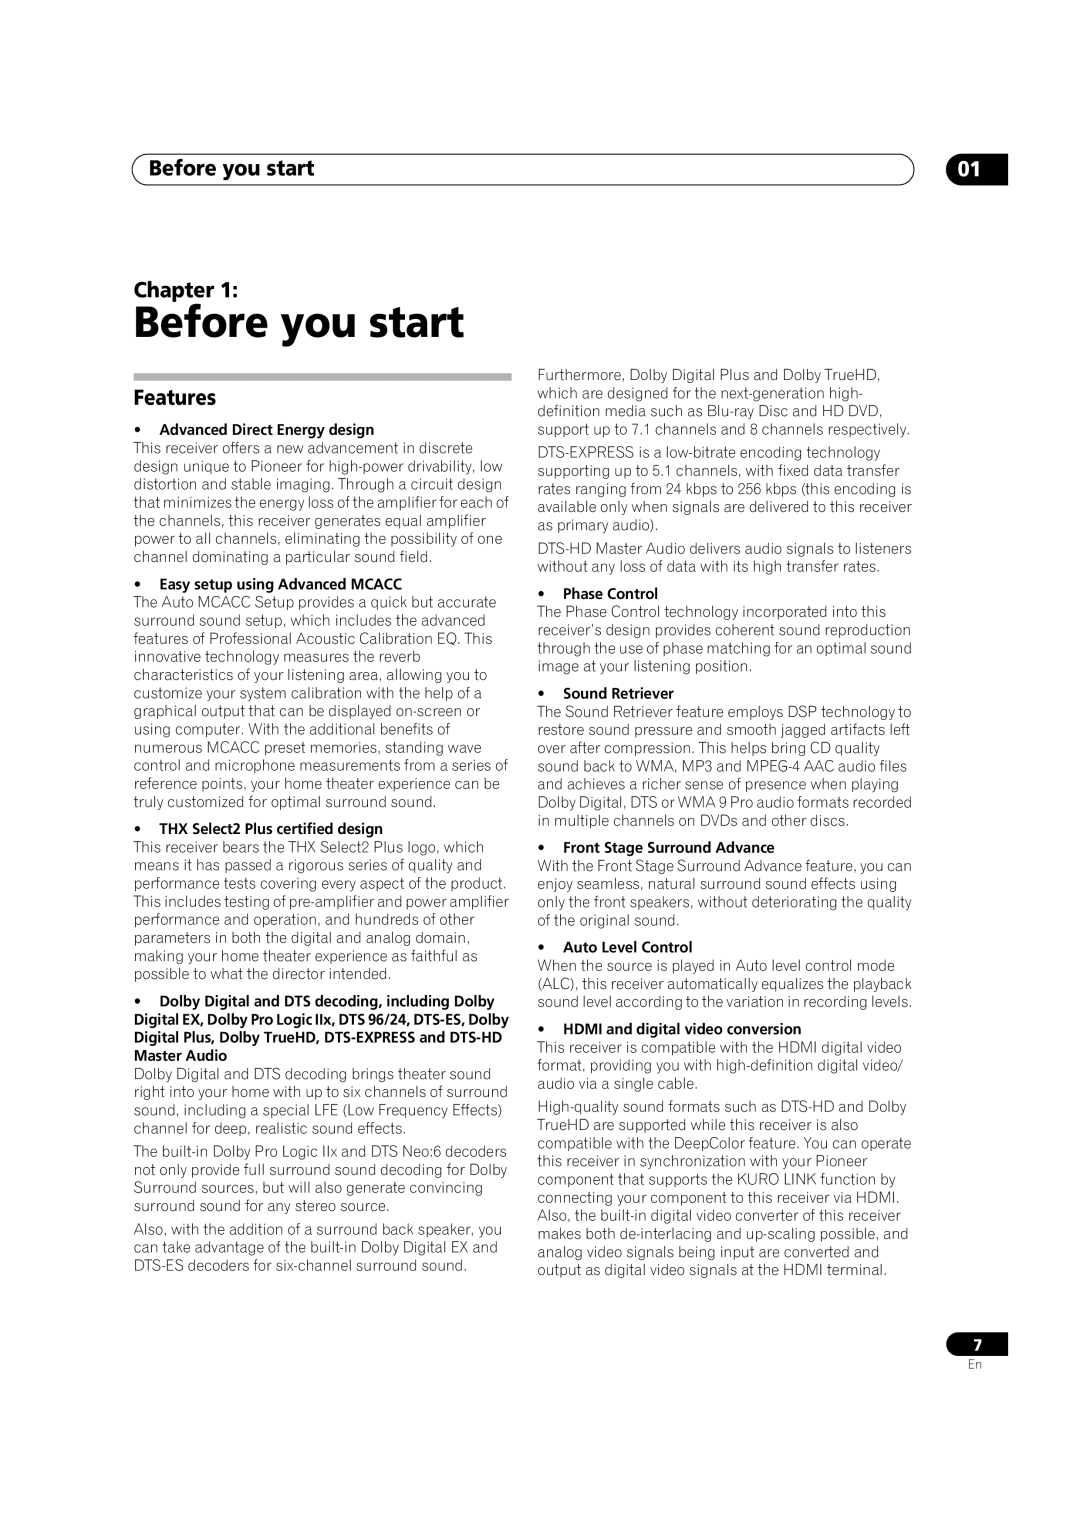 Pioneer VSX-LX52 manual Before you start Chapter, Features 